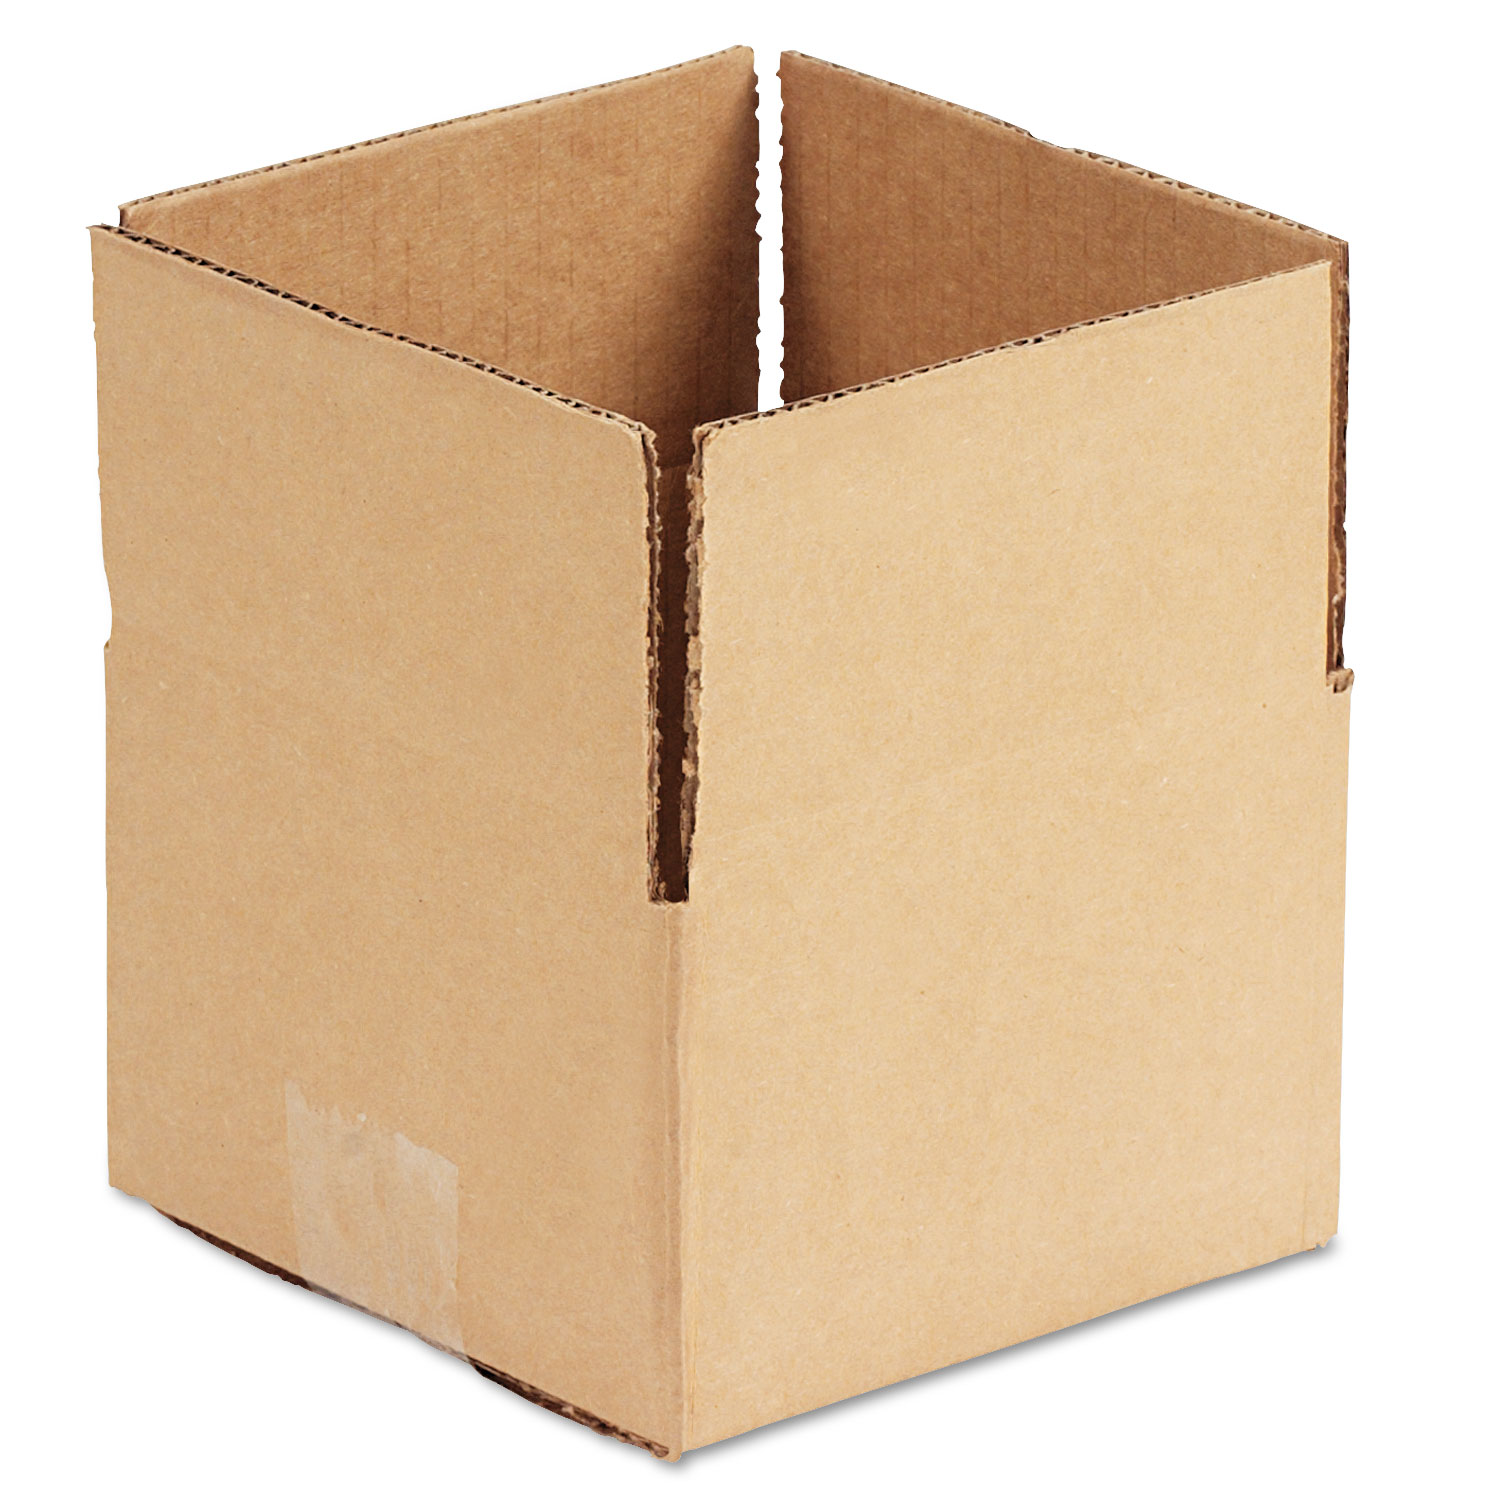  General Supply UFS664 Fixed-Depth Shipping Boxes, Regular Slotted Container (RSC), 6 x 6 x 4, Brown Kraft, 25/Bundle (UFS664) 